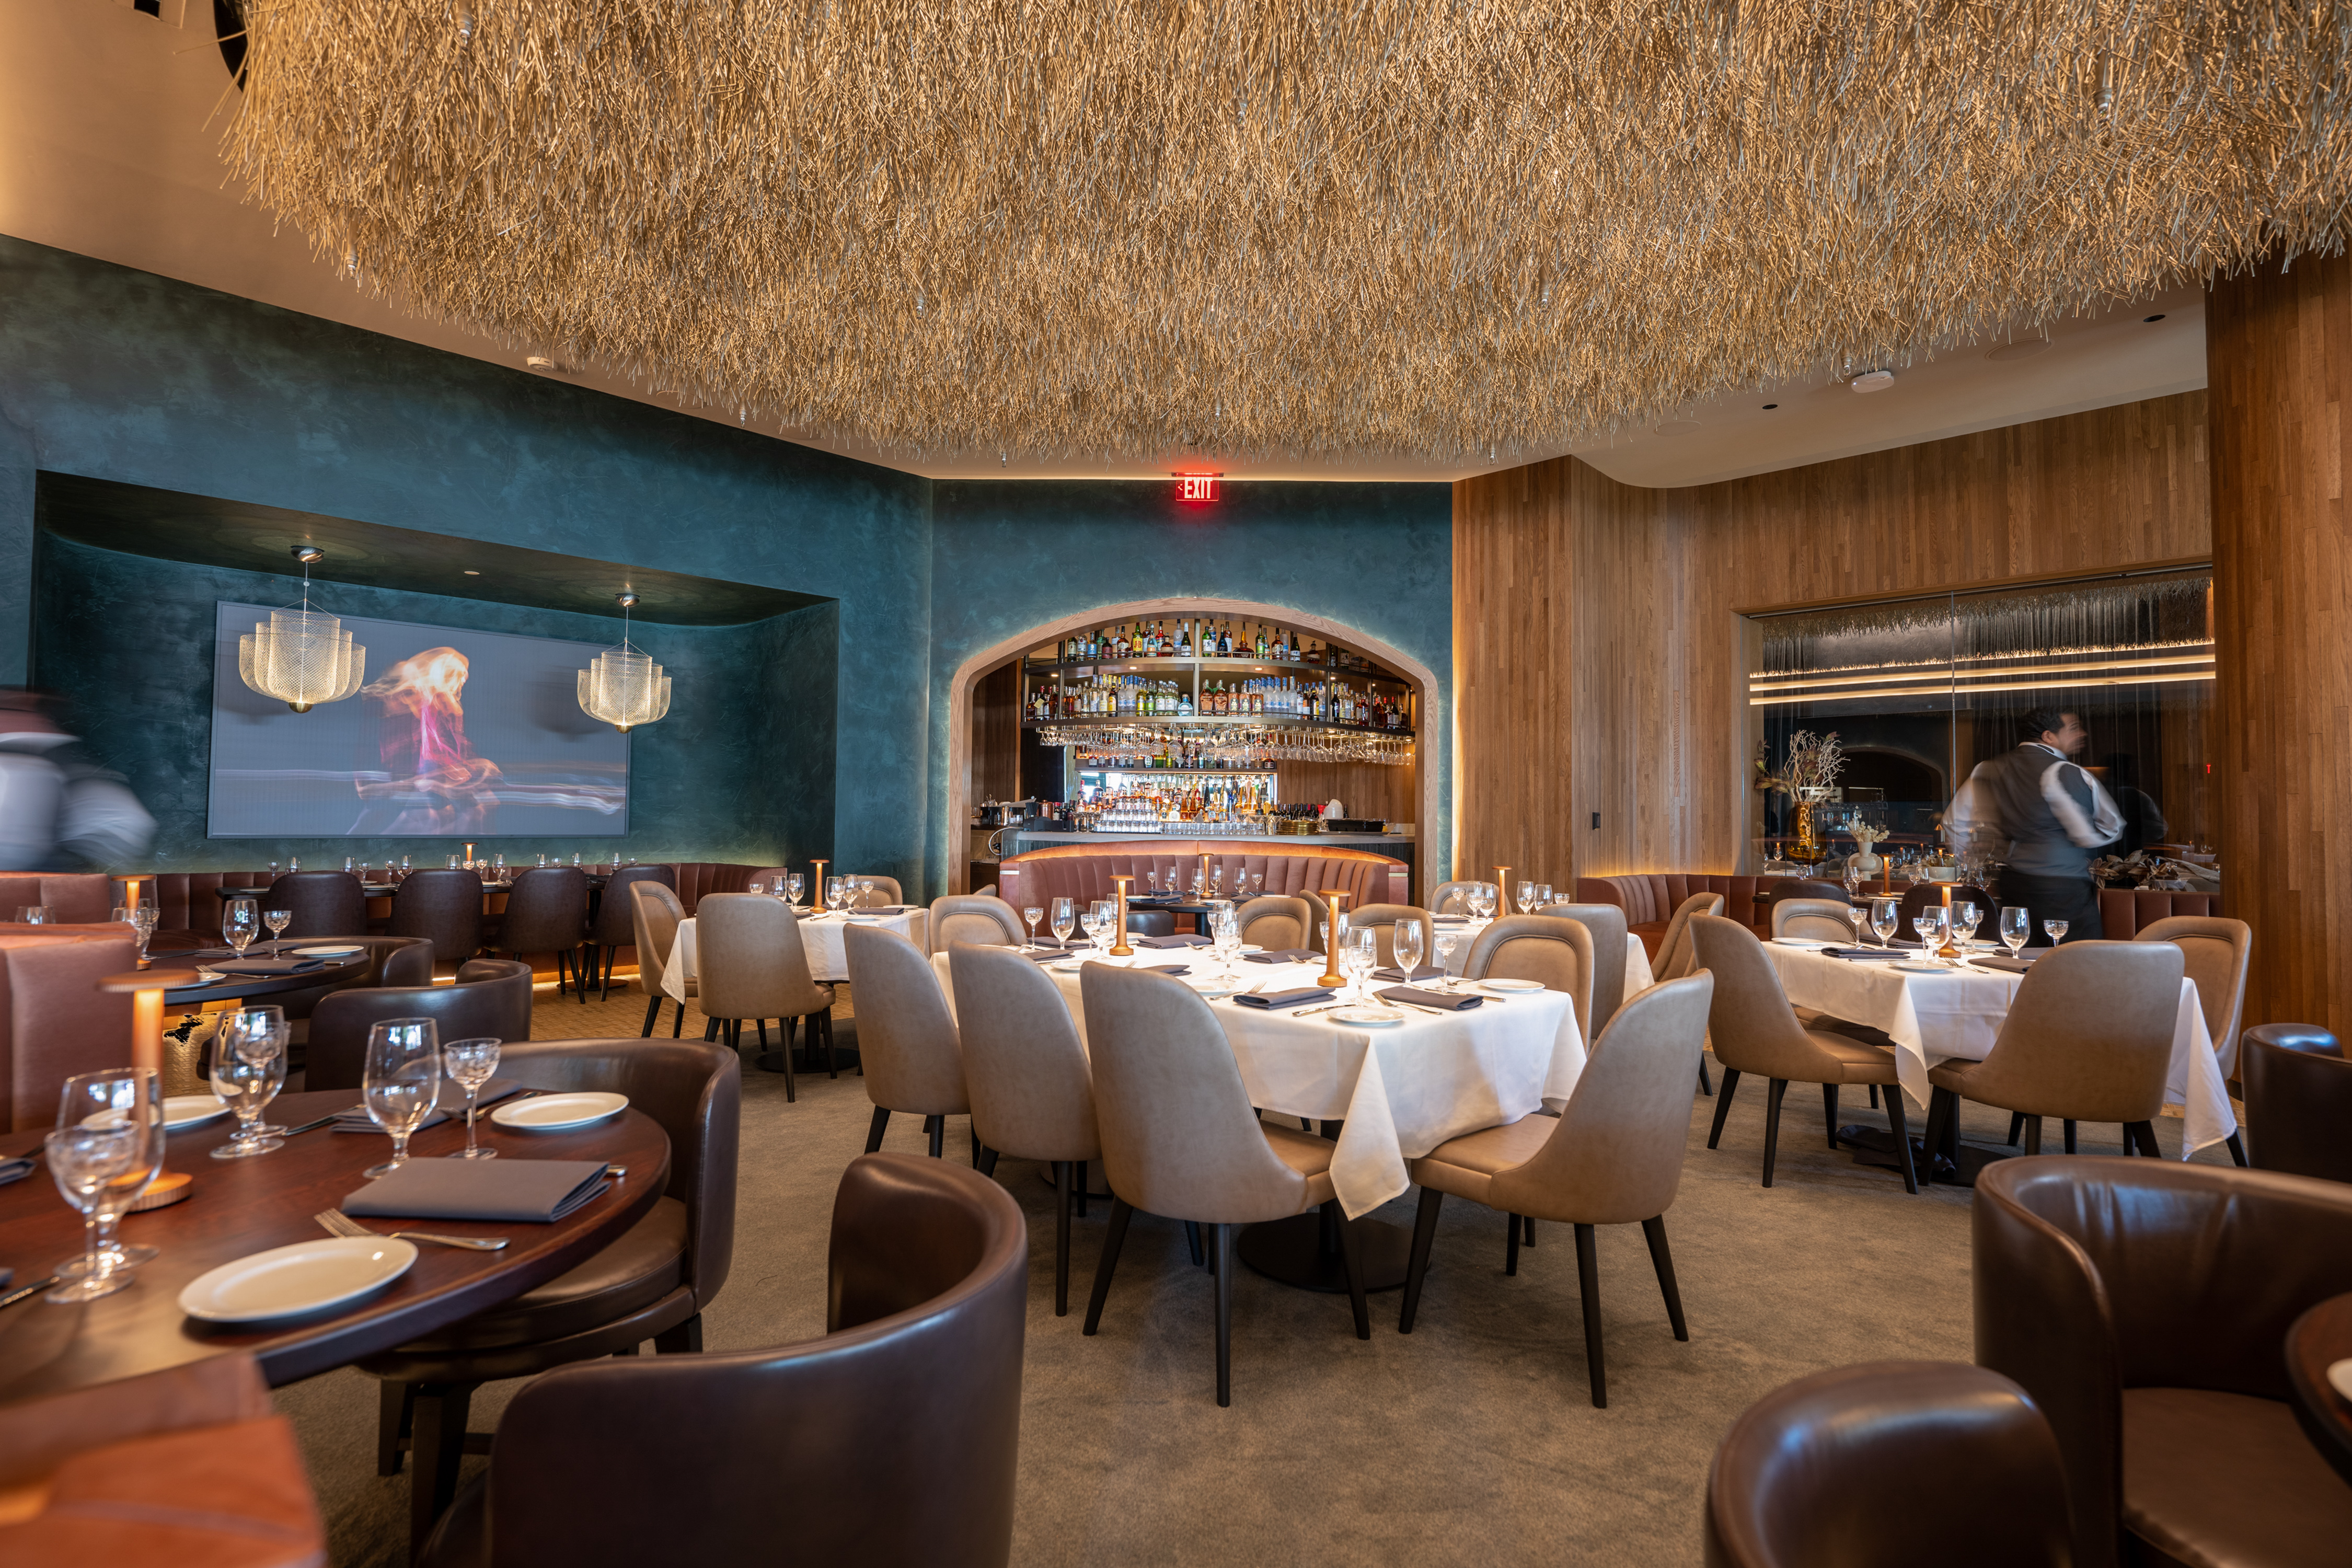 A dining room with blue walls at Ocean Prime.